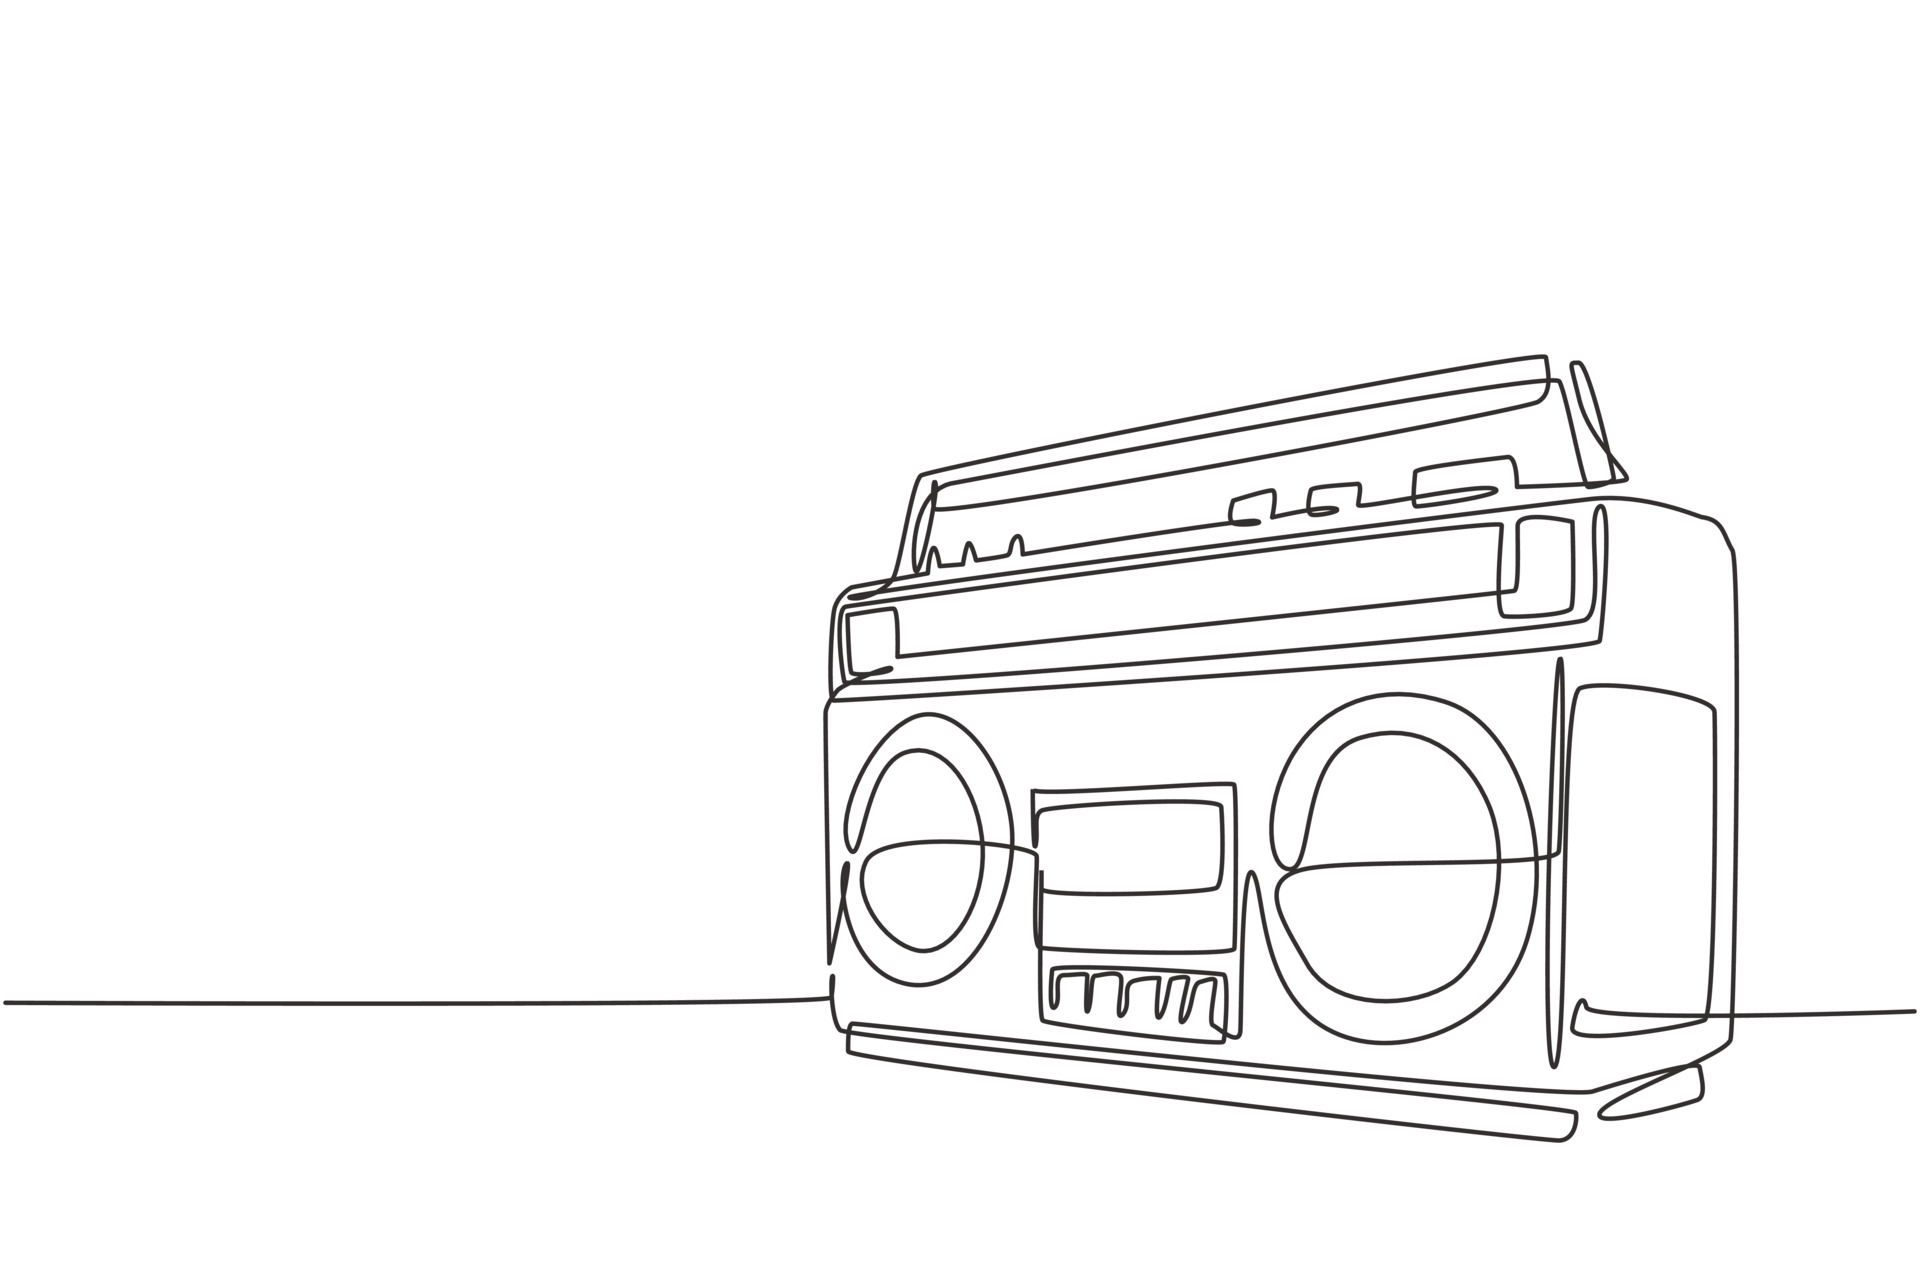 How to Draw a Radio Step by Step